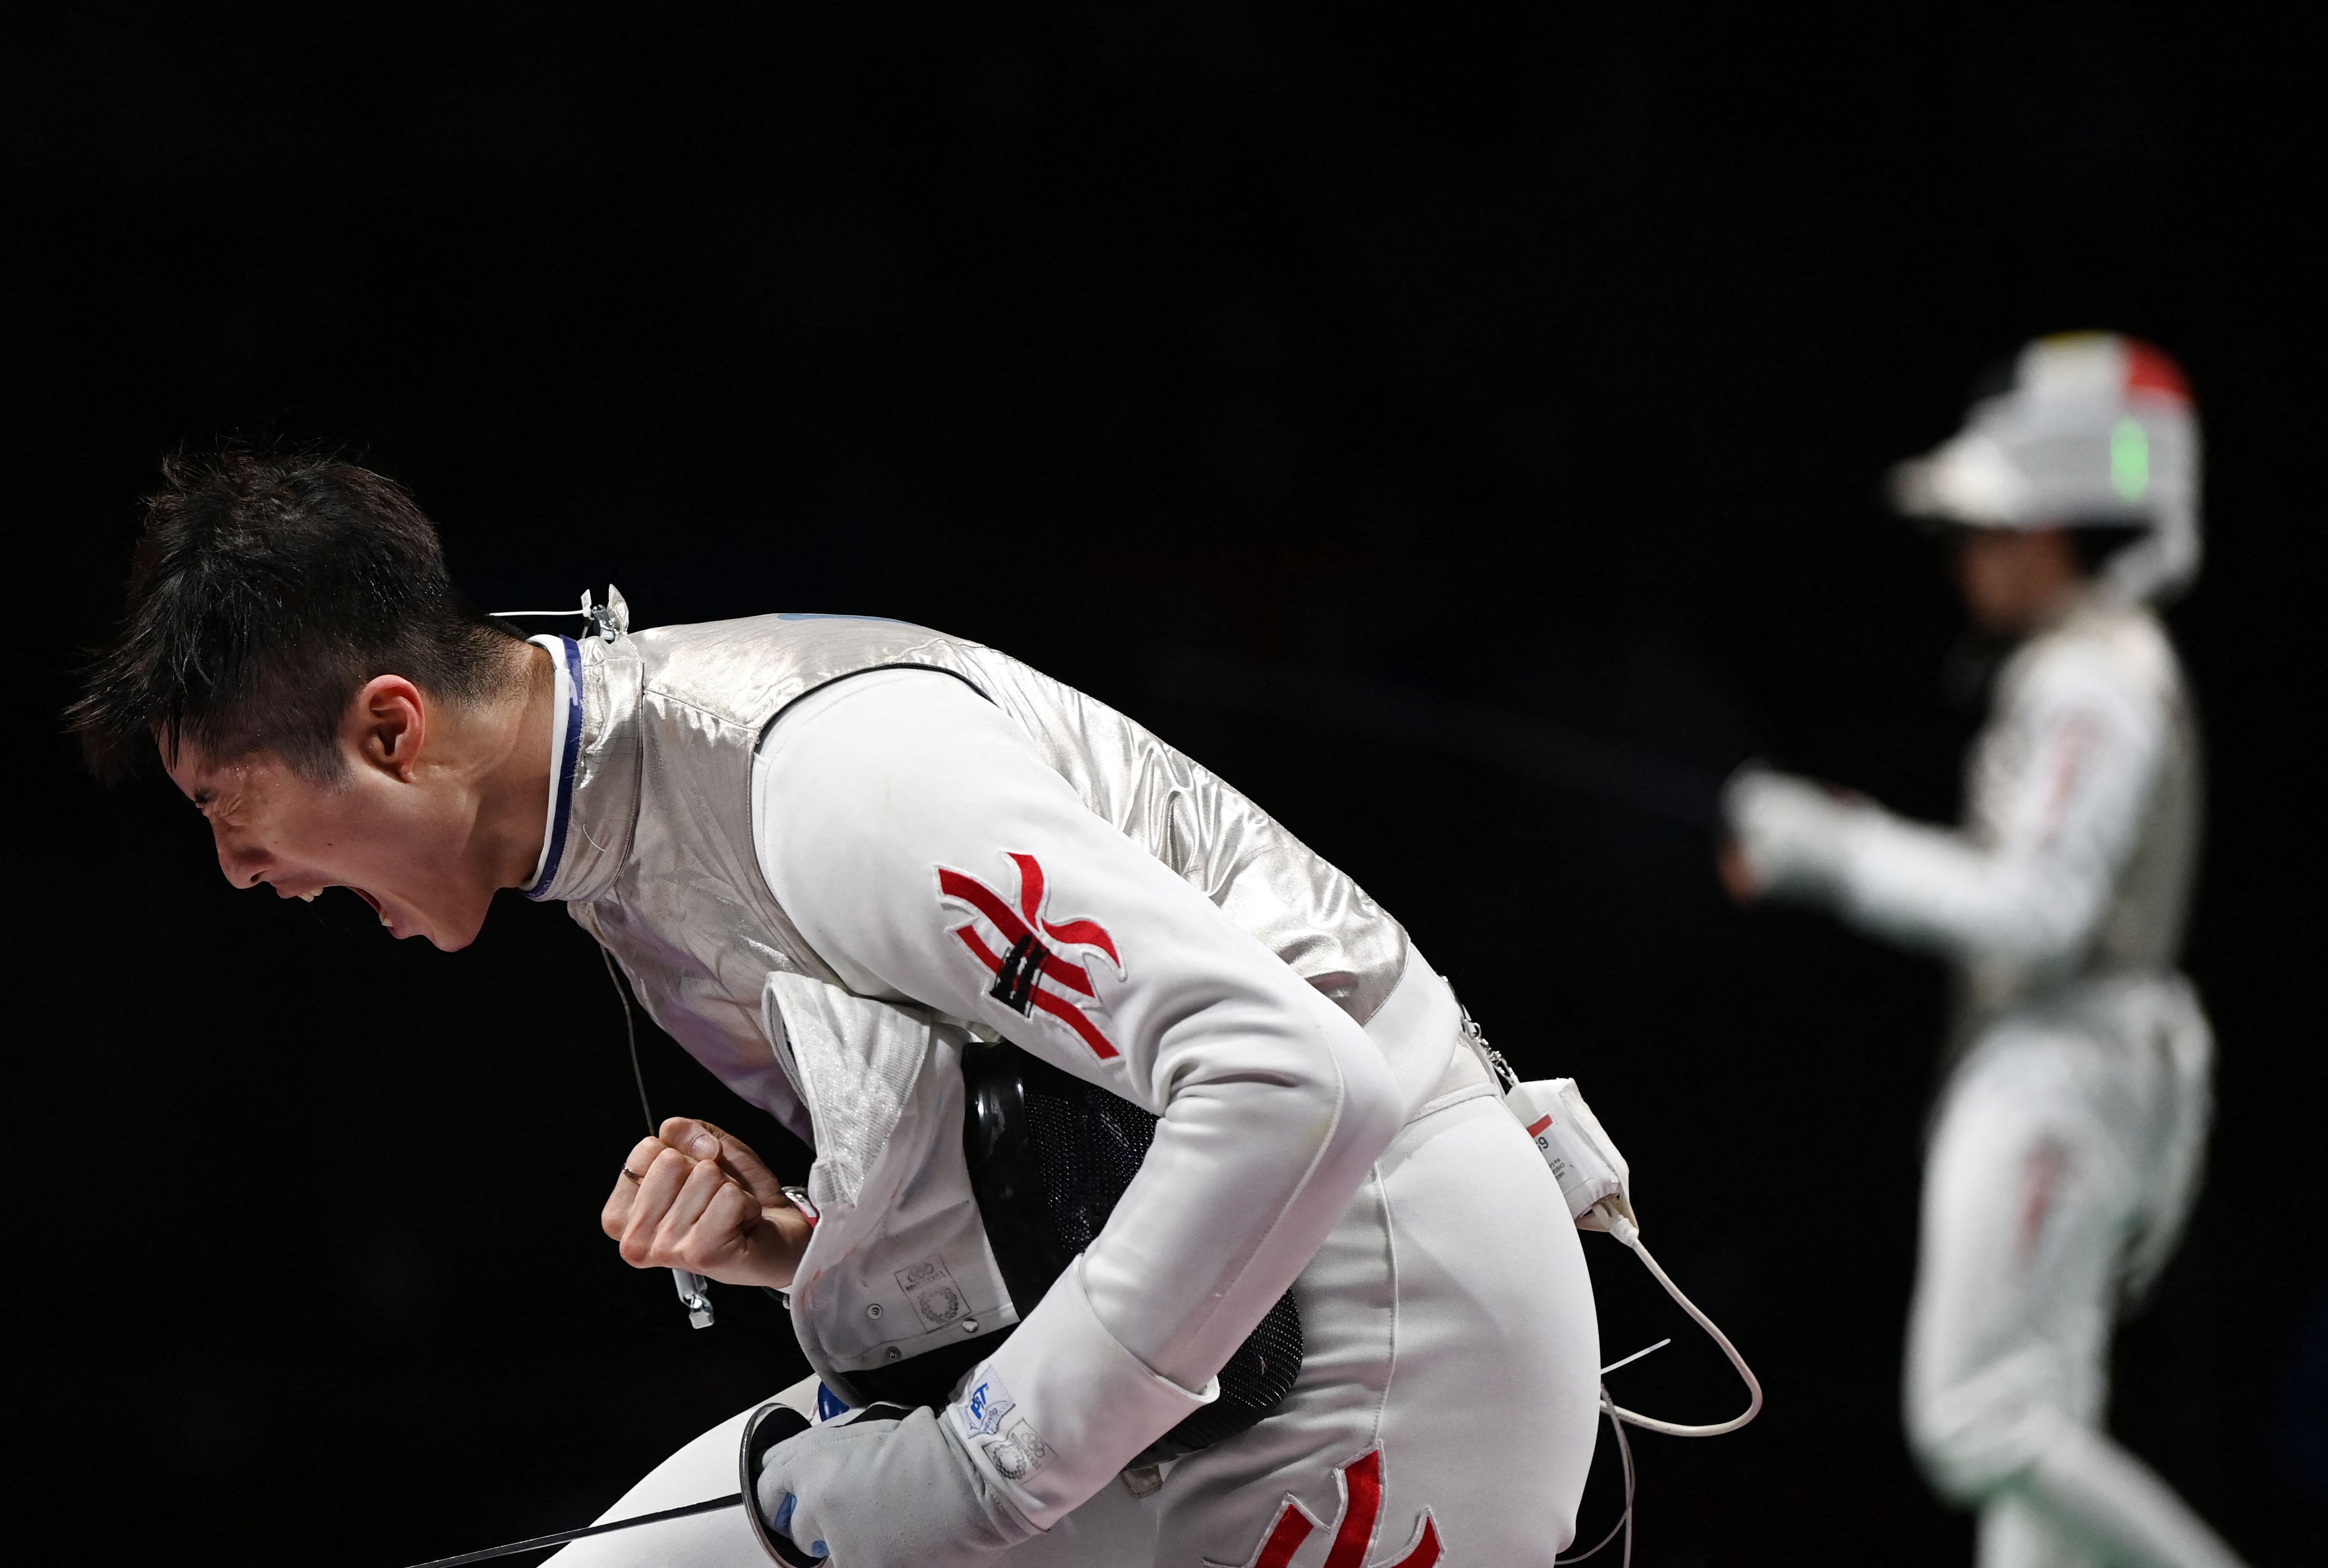 Hong Kong's Edgar Cheung celebrates after winning against Italy's Alessio Foconi in the individual foil qualifying bout on July 26.